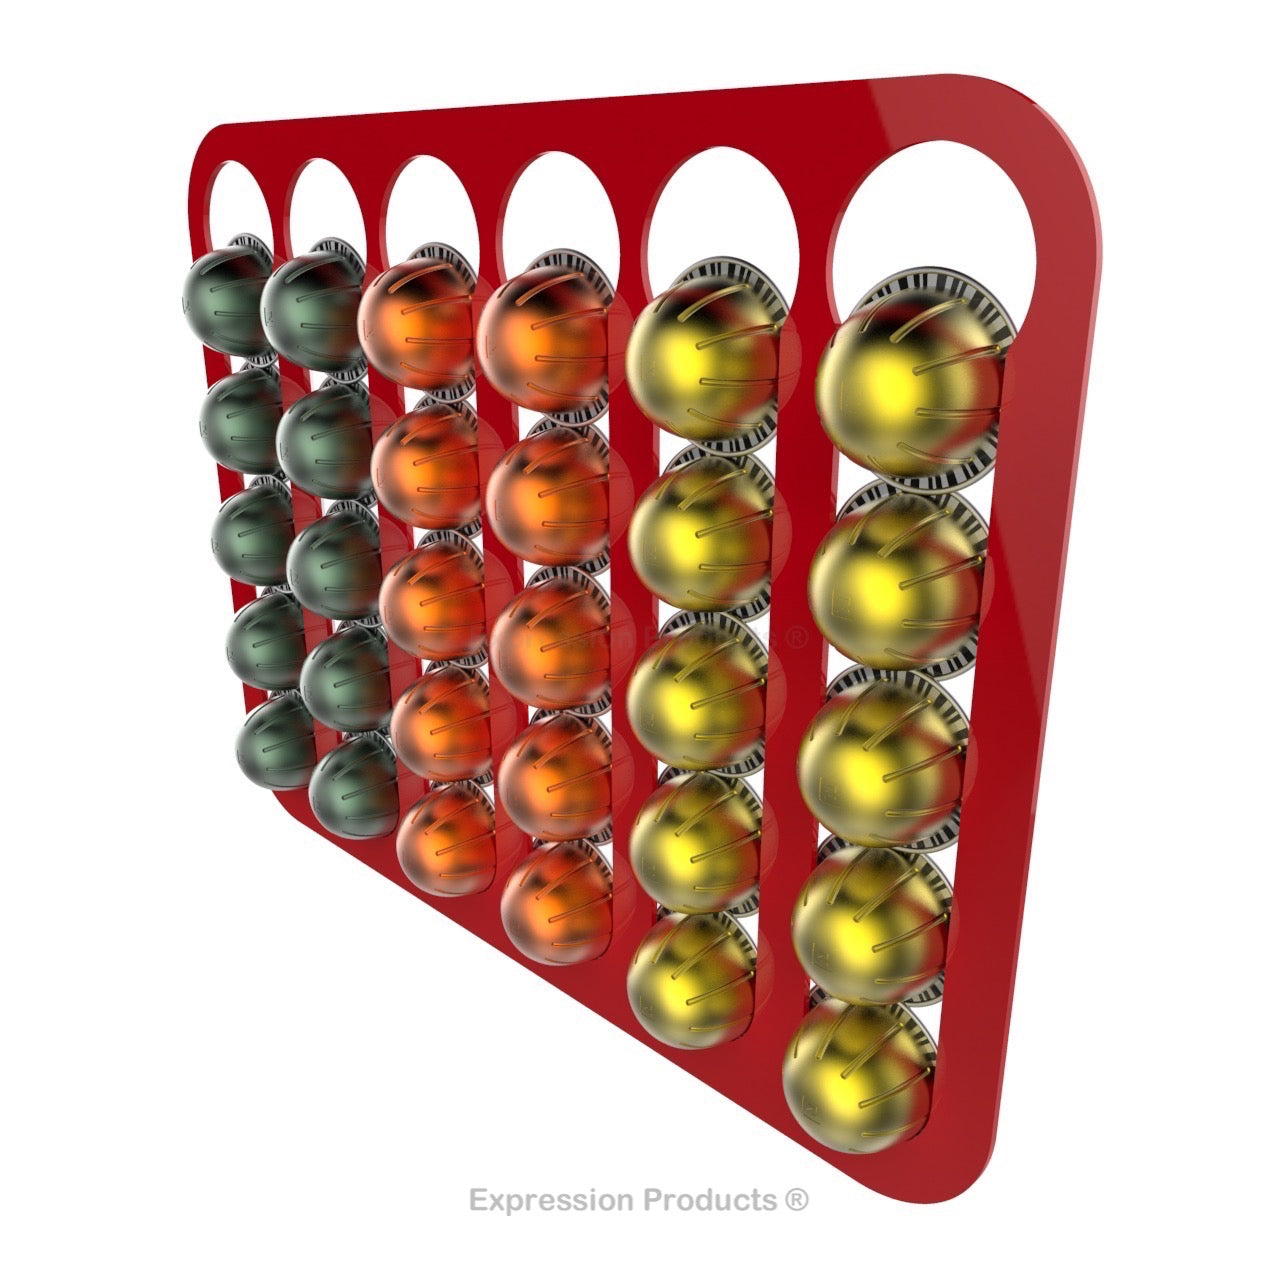 Magnetic Nespresso Vertuo capsule holder shown in red holding 30 pods